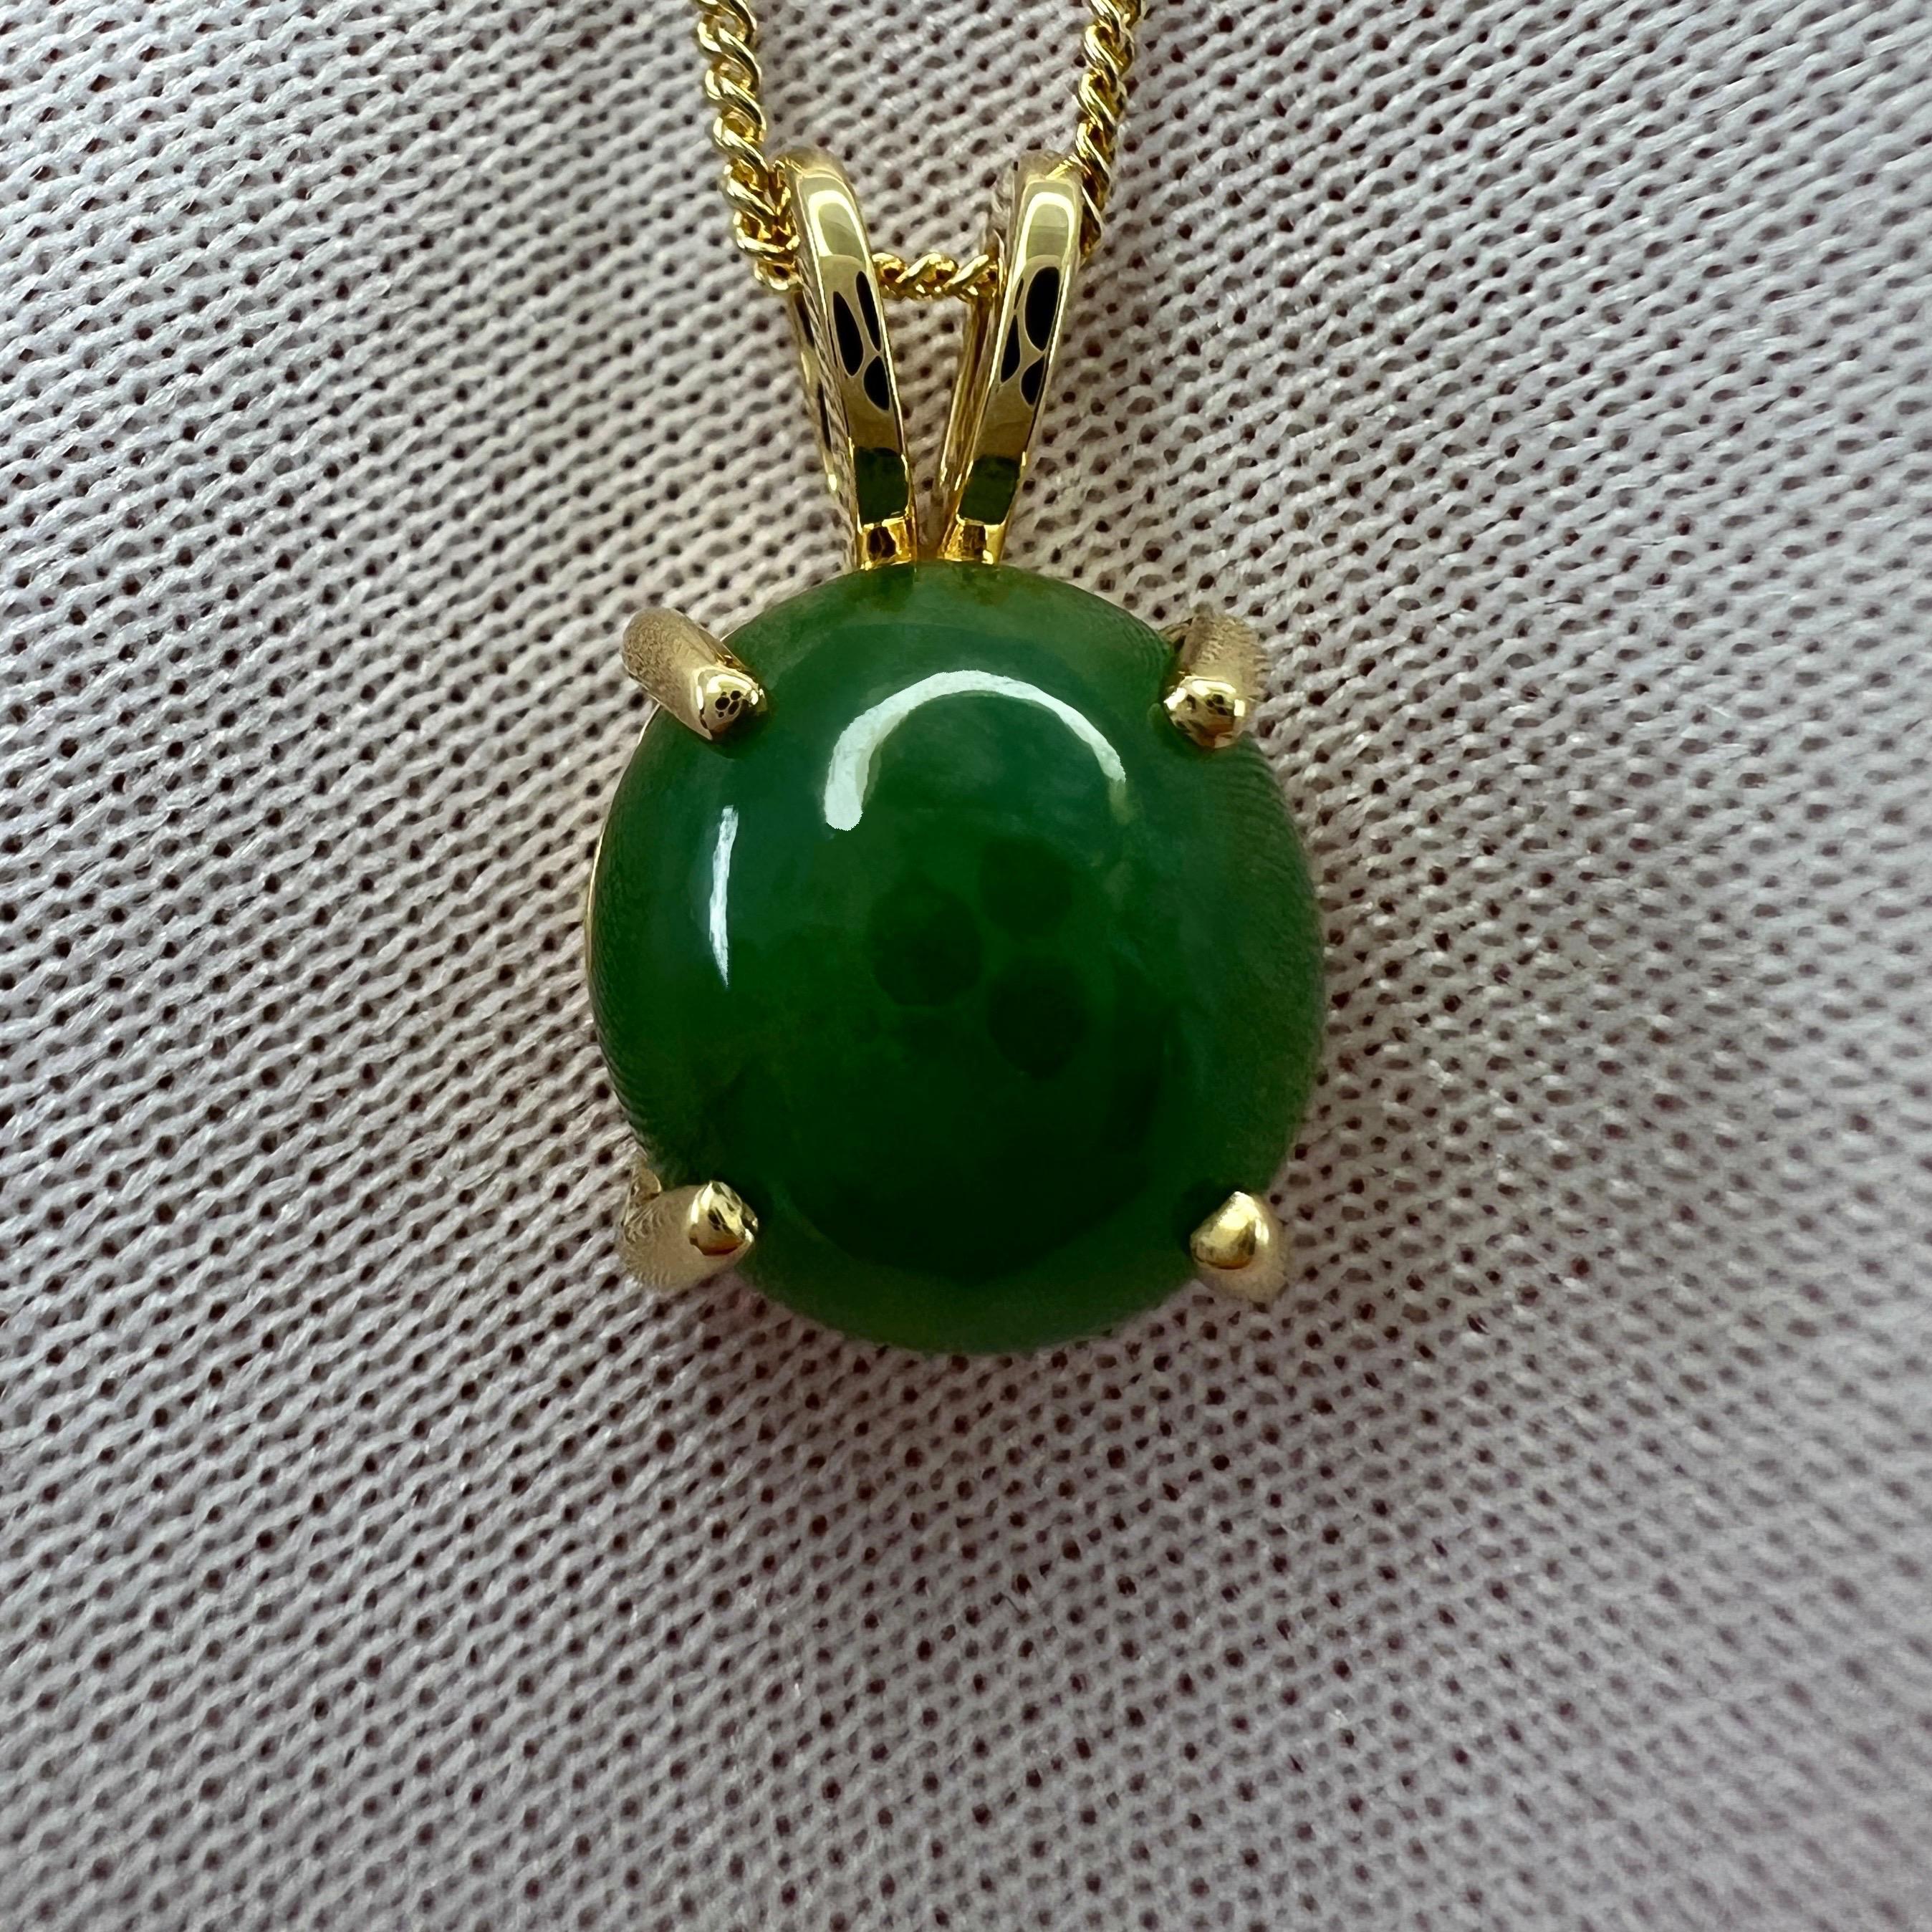 Natural IGI Certified A-Grade Jadeite Jade Untreated 18k Yellow Gold Pendant Necklace.

Stunning 3.70 carat jadeite jade with a beautiful deep green colour, set in a fine 18k yellow gold claw set solitaire pendant.
Has an excellent oval cabochon cut